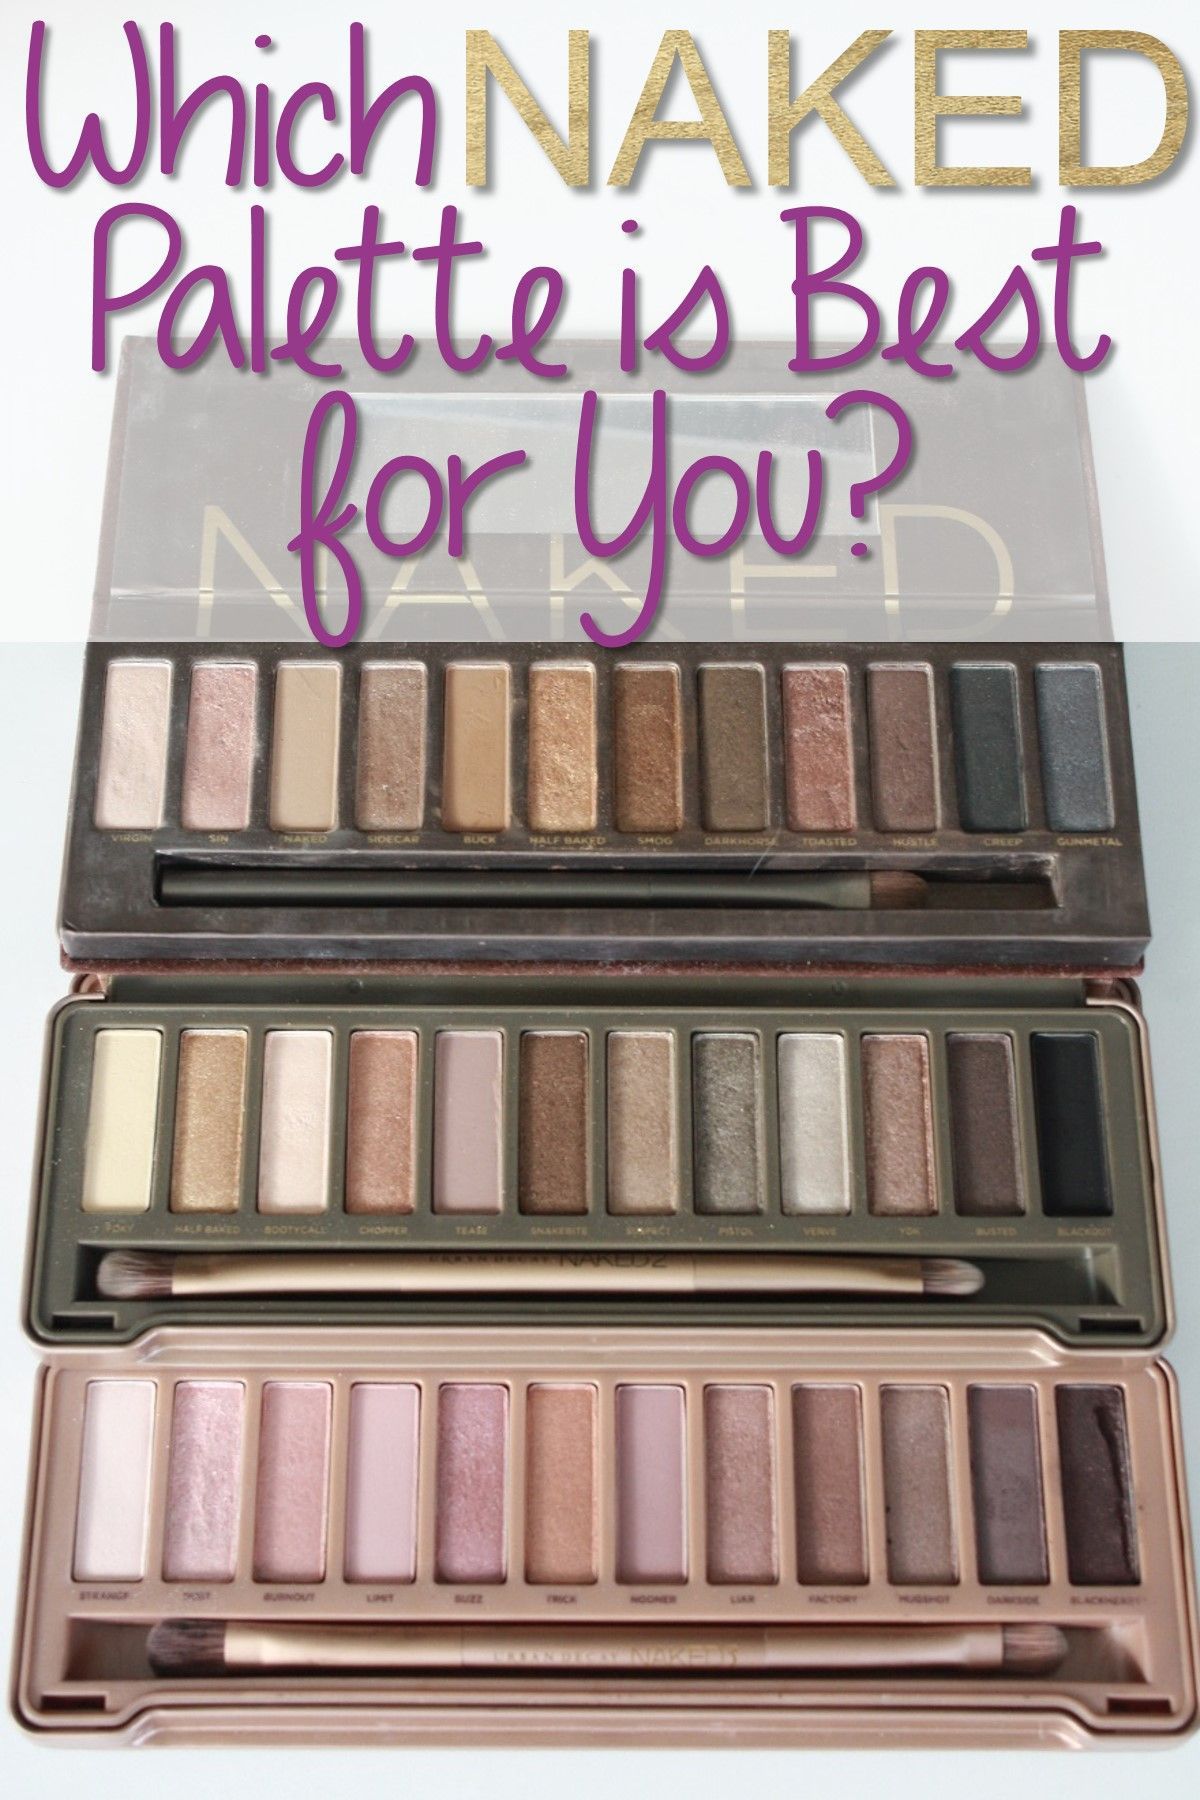 Which Urban Decay NAKED Palette is Best for You?